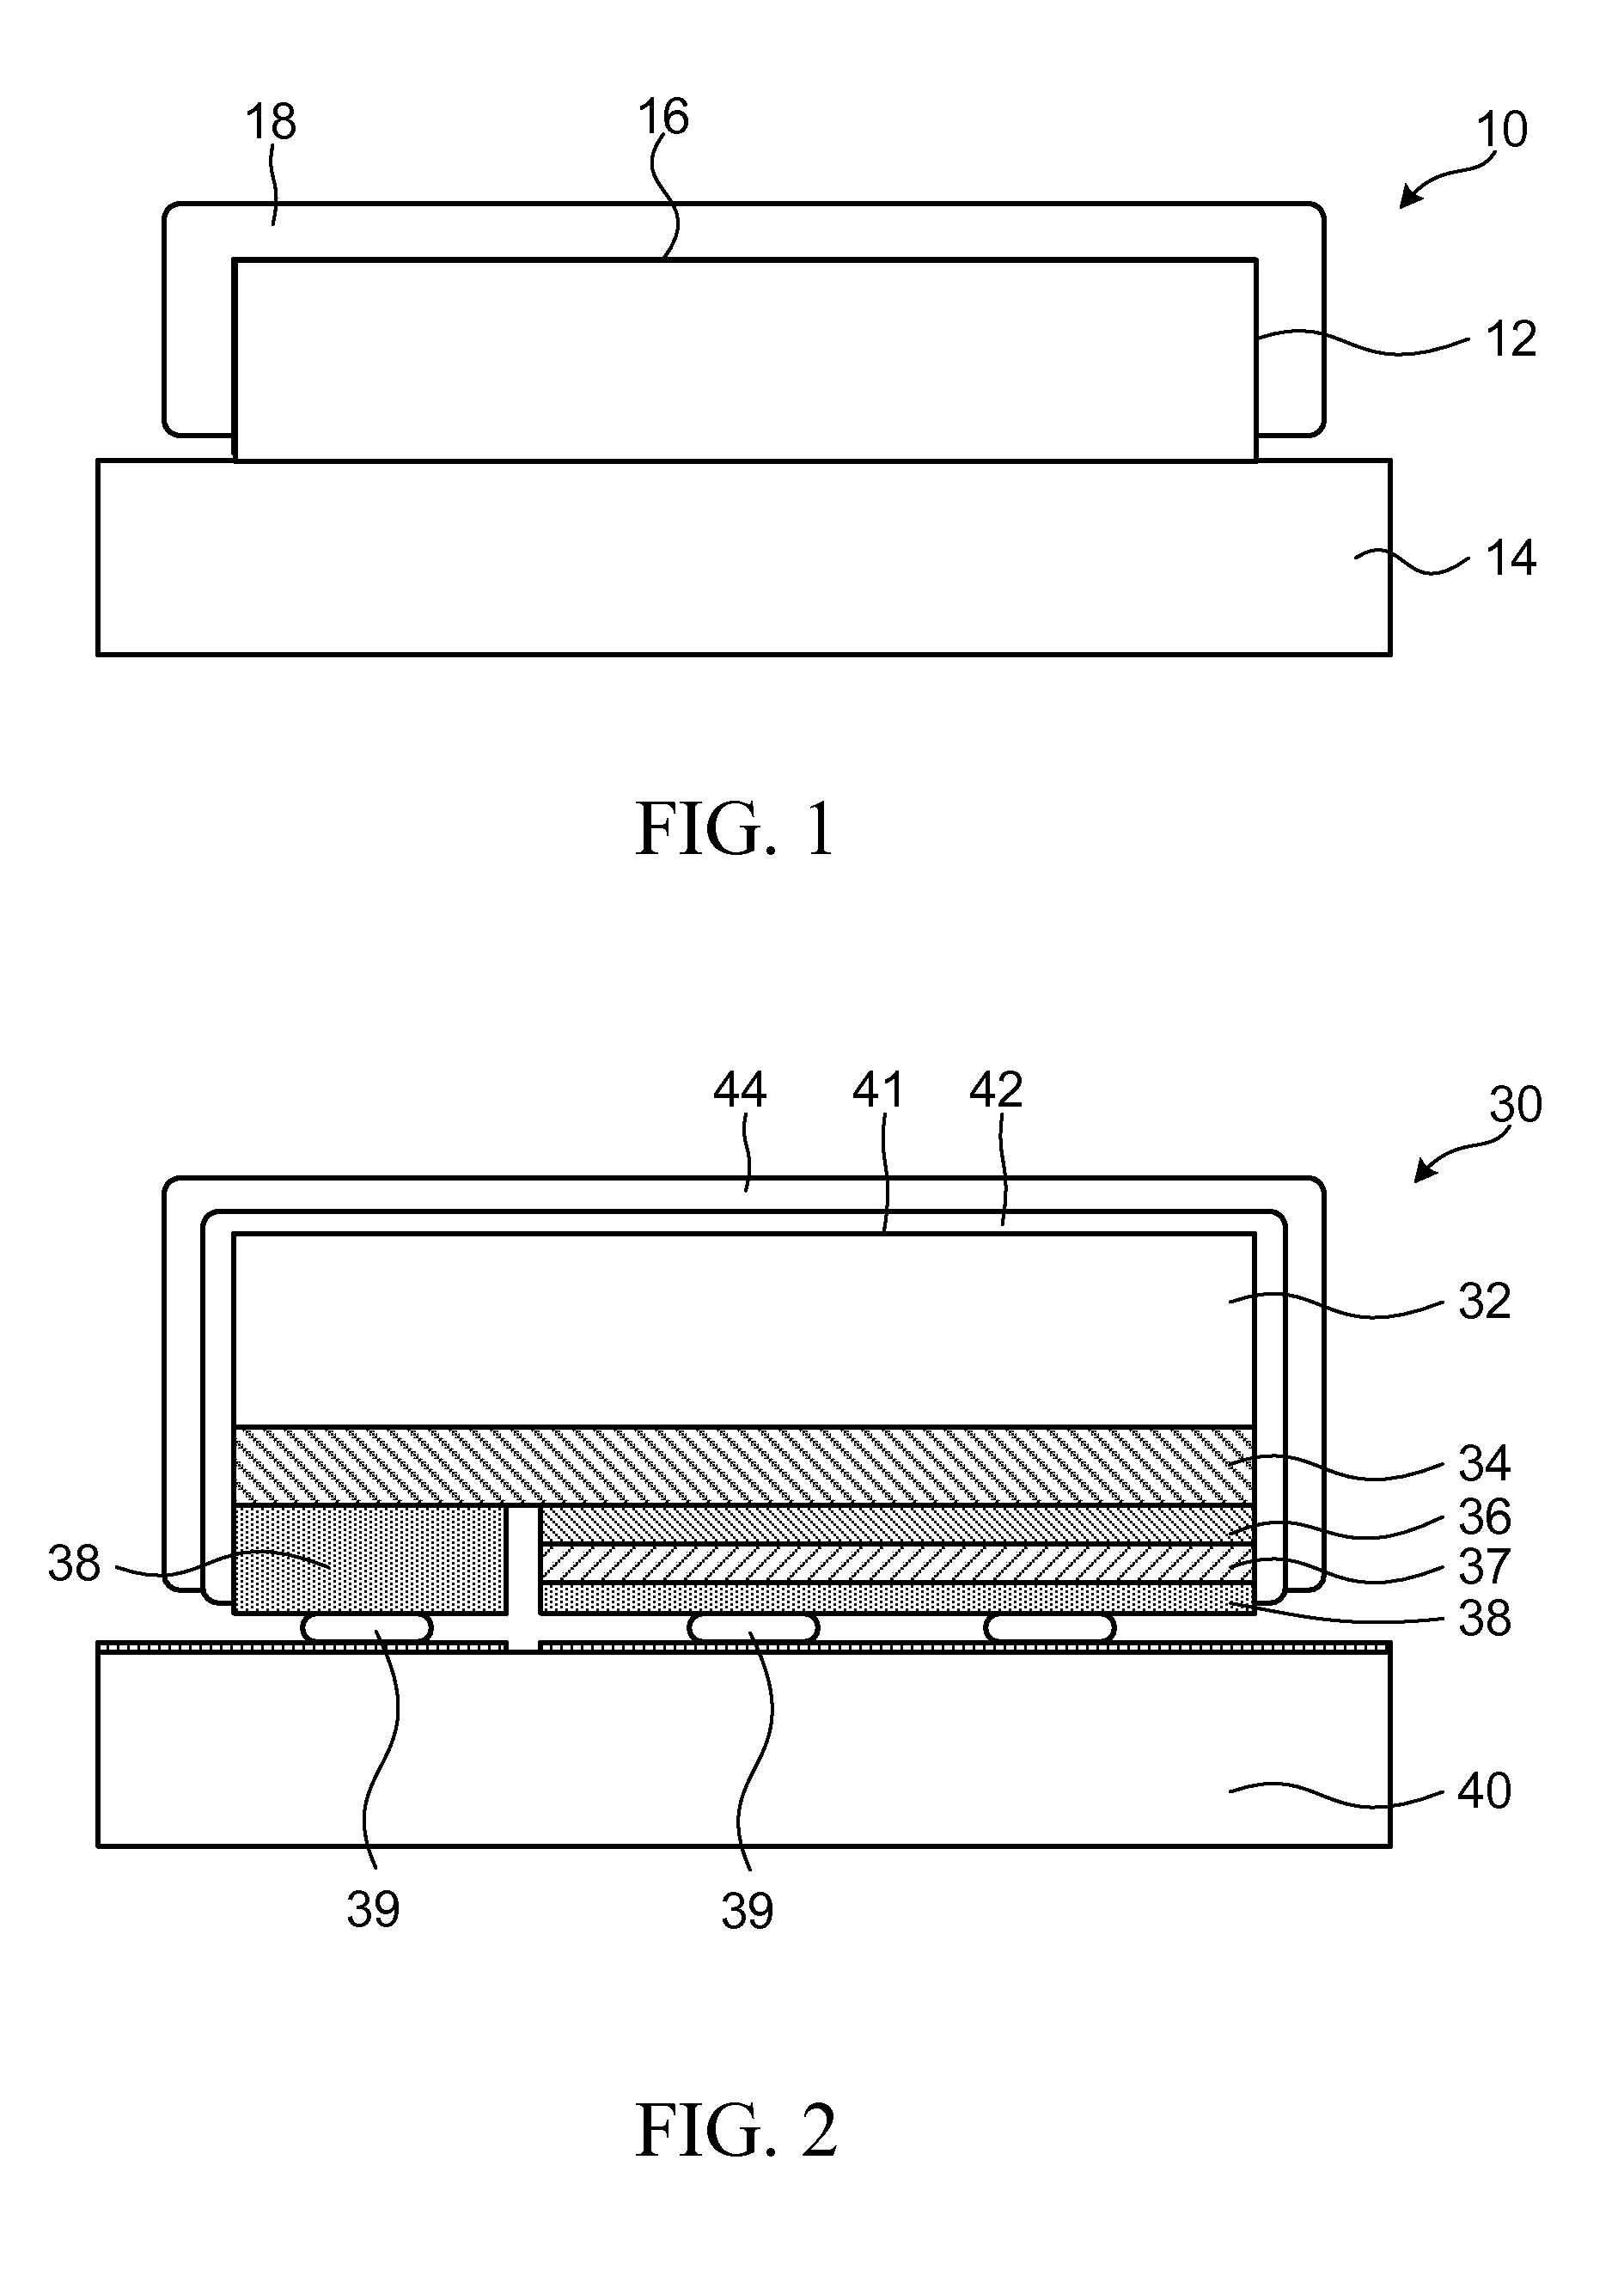 Silicone Resin for Protecting a Light Transmitting Surface of an Optoelectronic Device